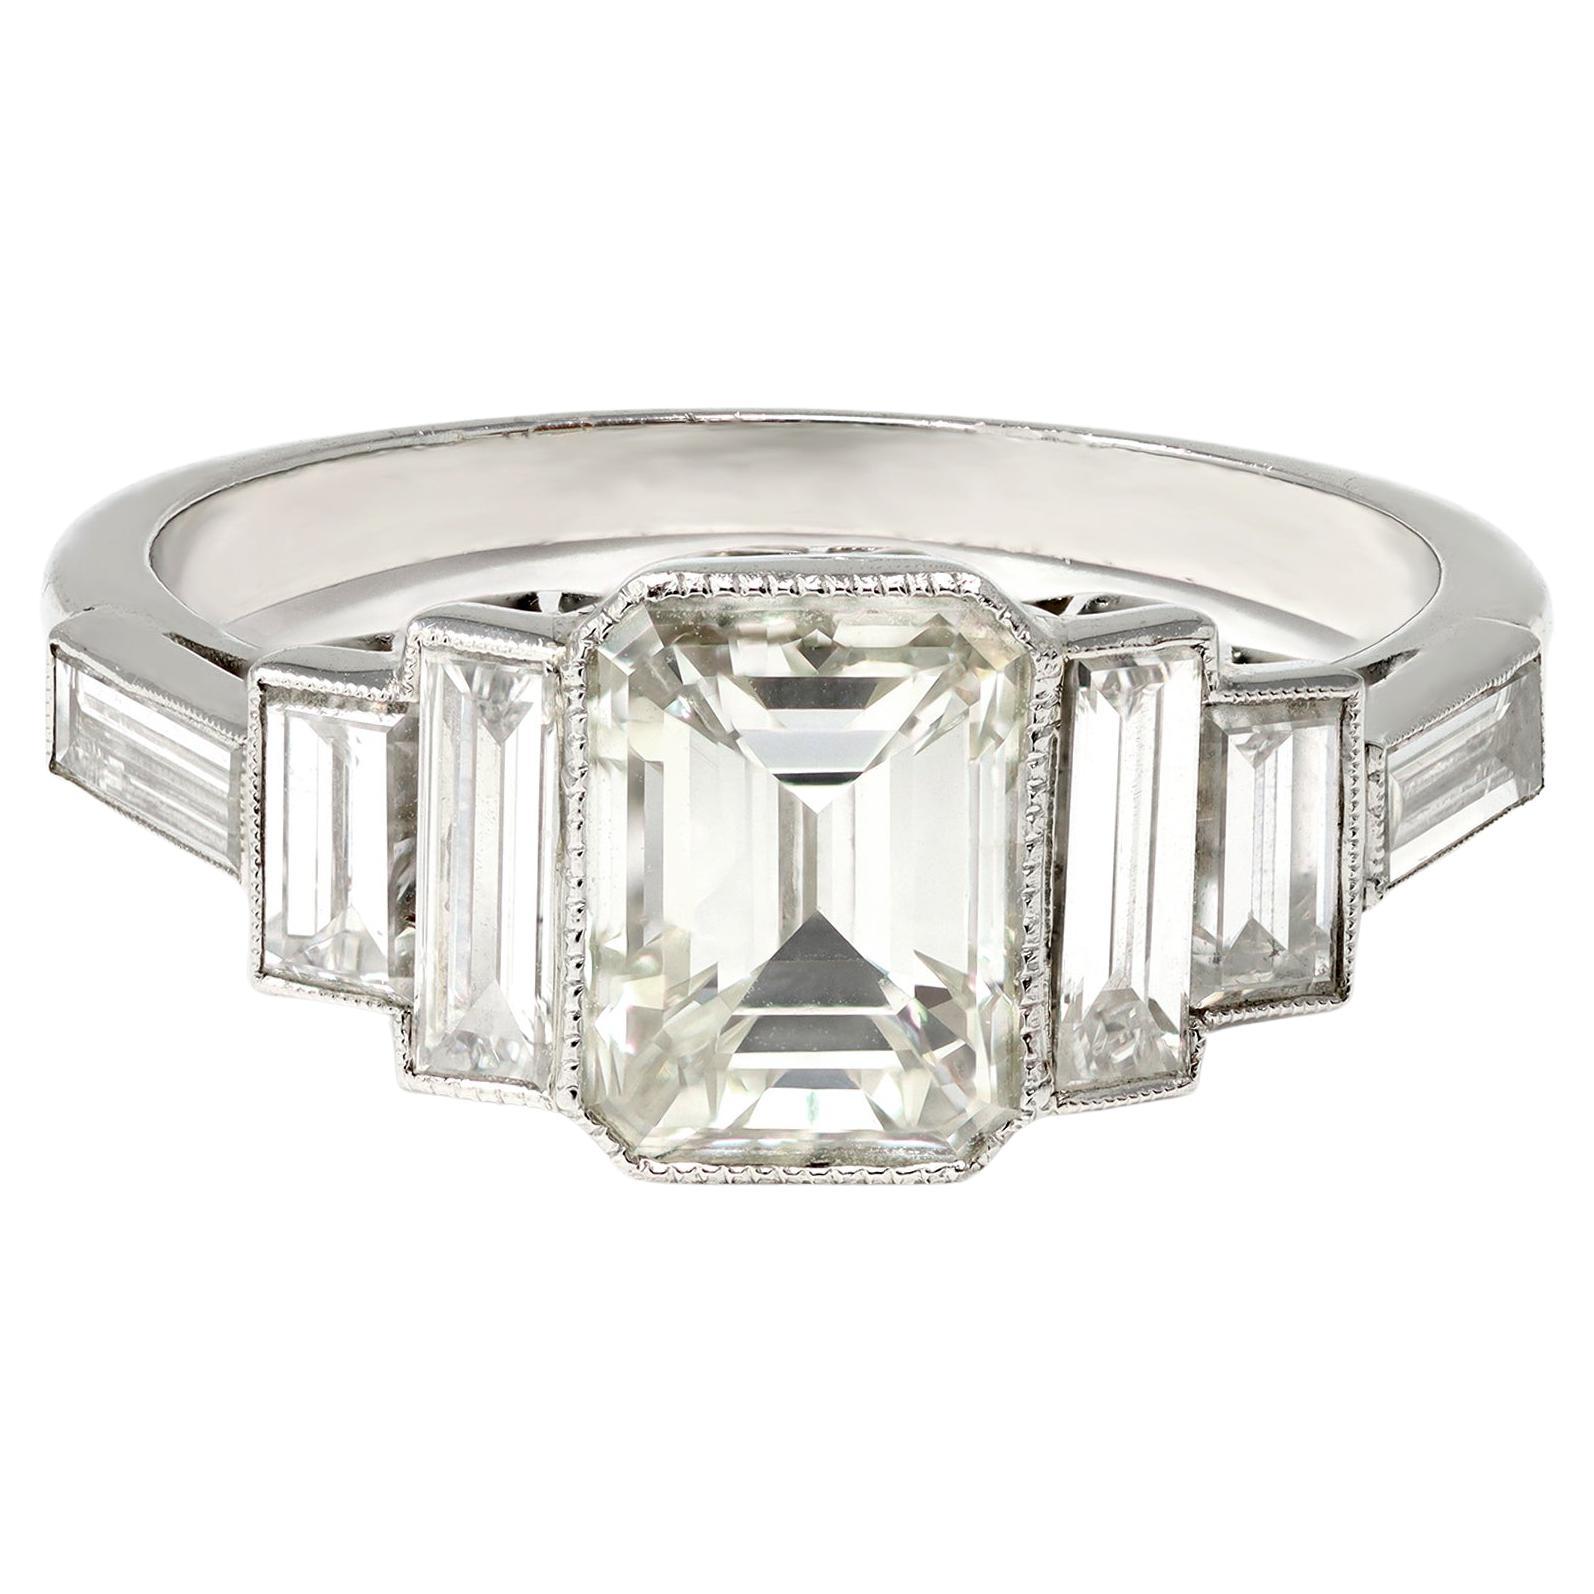 Emerald-Cut Diamond Ring with Side Baguettes Set in Platinum